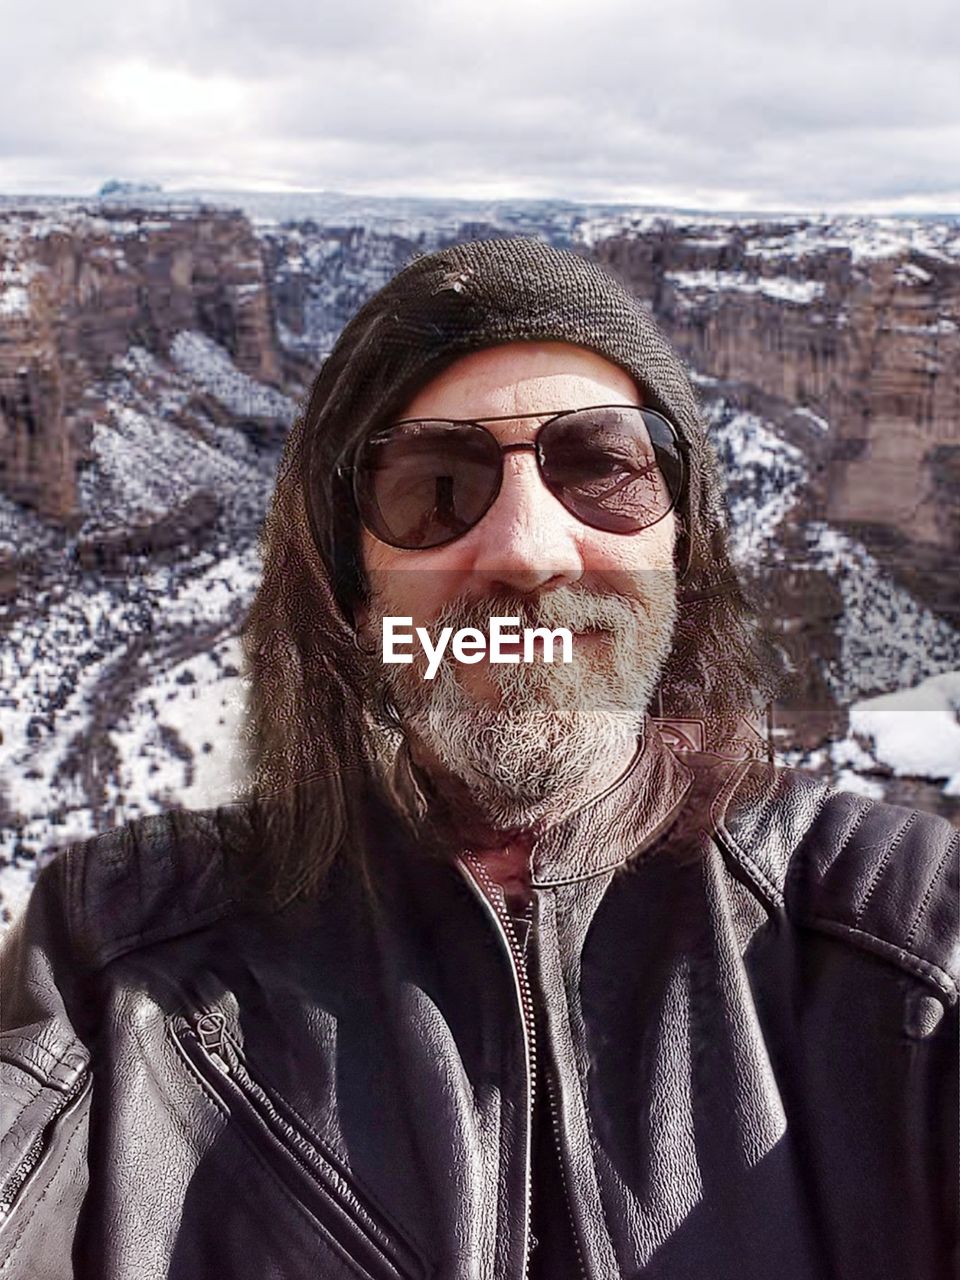 snow, winter, cold temperature, adult, portrait, one person, clothing, leisure activity, glasses, sunglasses, mountain, warm clothing, nature, cloud, front view, fashion, beard, facial hair, jacket, smiling, sky, looking at camera, men, mountain range, headshot, day, mature adult, lifestyles, holiday, vacation, person, scenics - nature, environment, trip, travel, outdoors, happiness, landscape, frozen, travel destinations, beauty in nature, hiking, adventure, emotion, sunlight, standing, spring, human face, ski holiday, land, goggles, non-urban scene, waist up, human hair